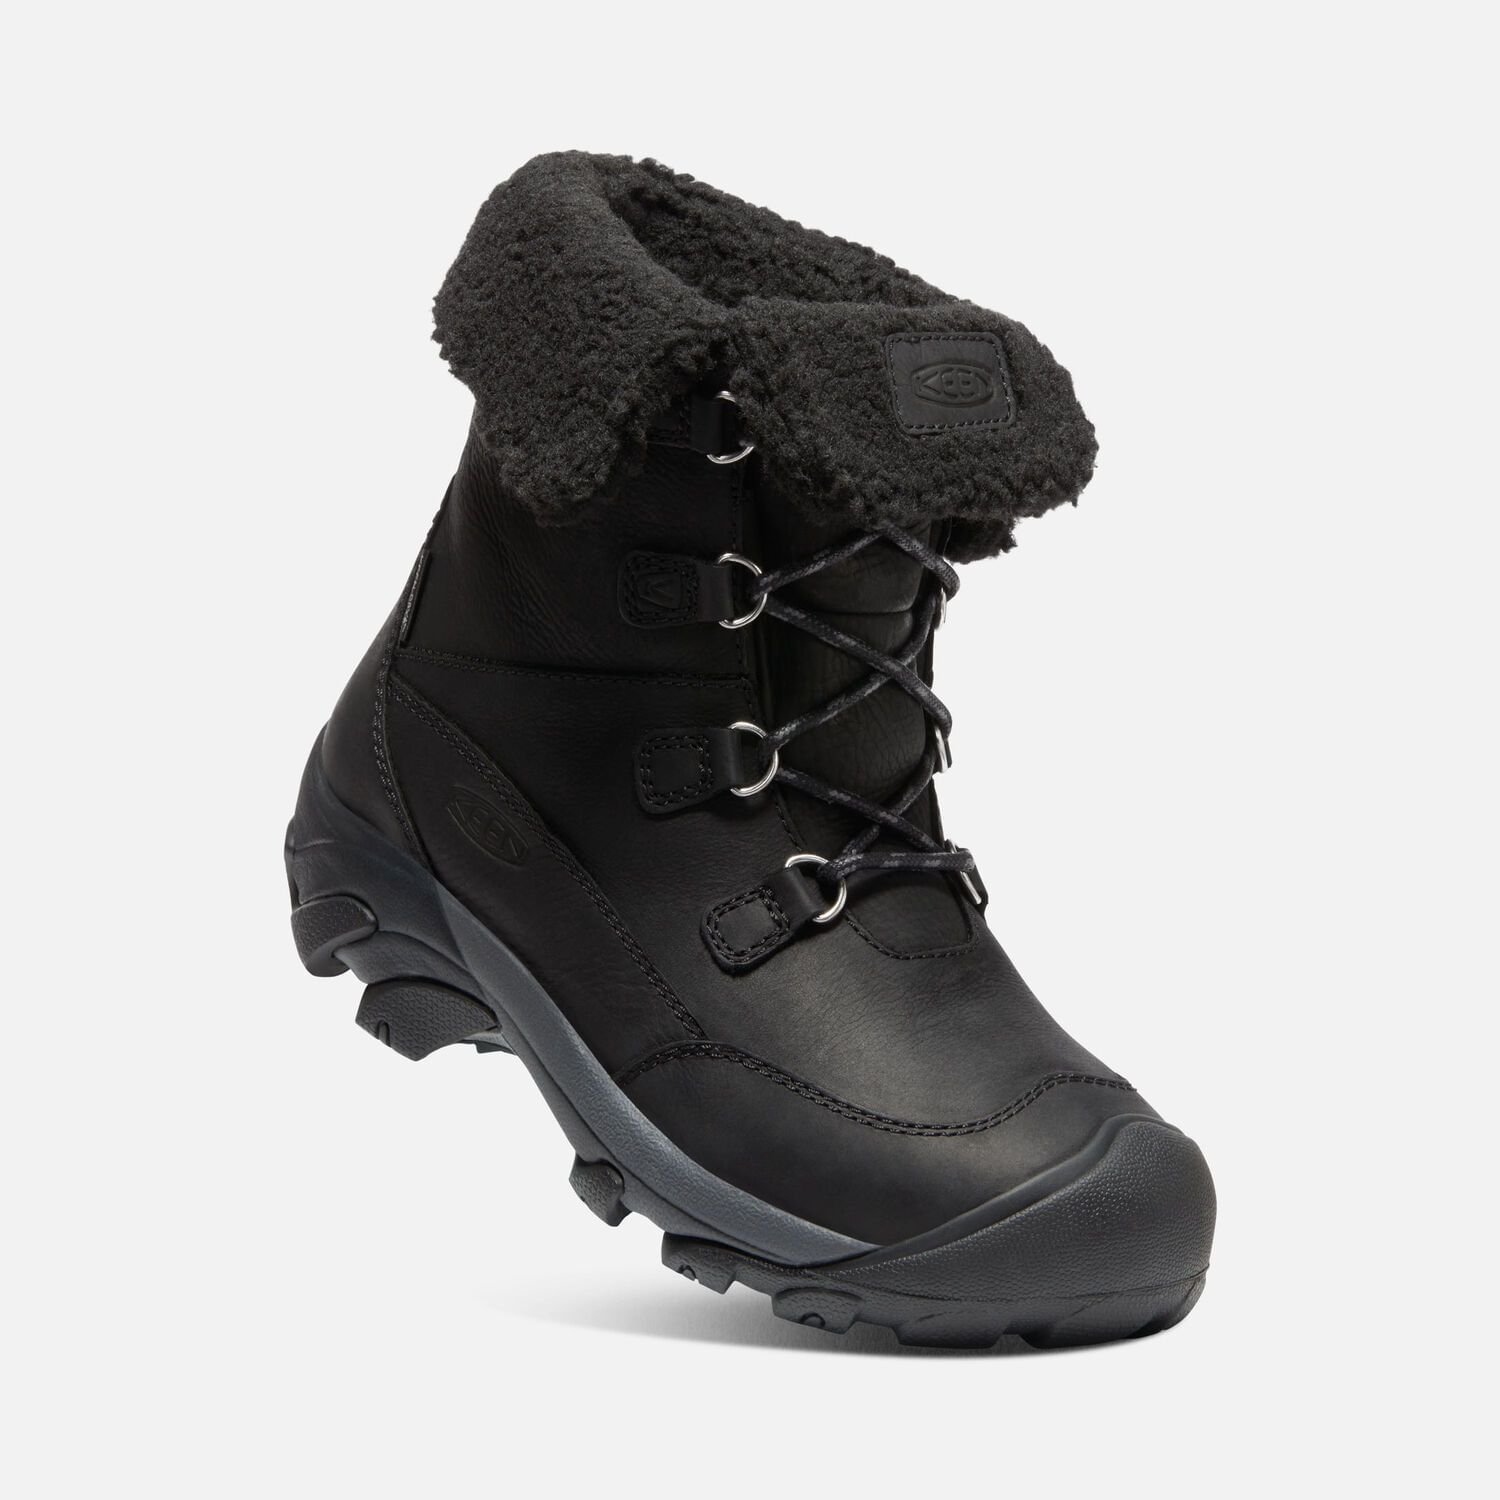 Hailey Black Ankle Boot: Waterproof, BUY ONLINE, Fits to a T – Fits to a T  Fashions